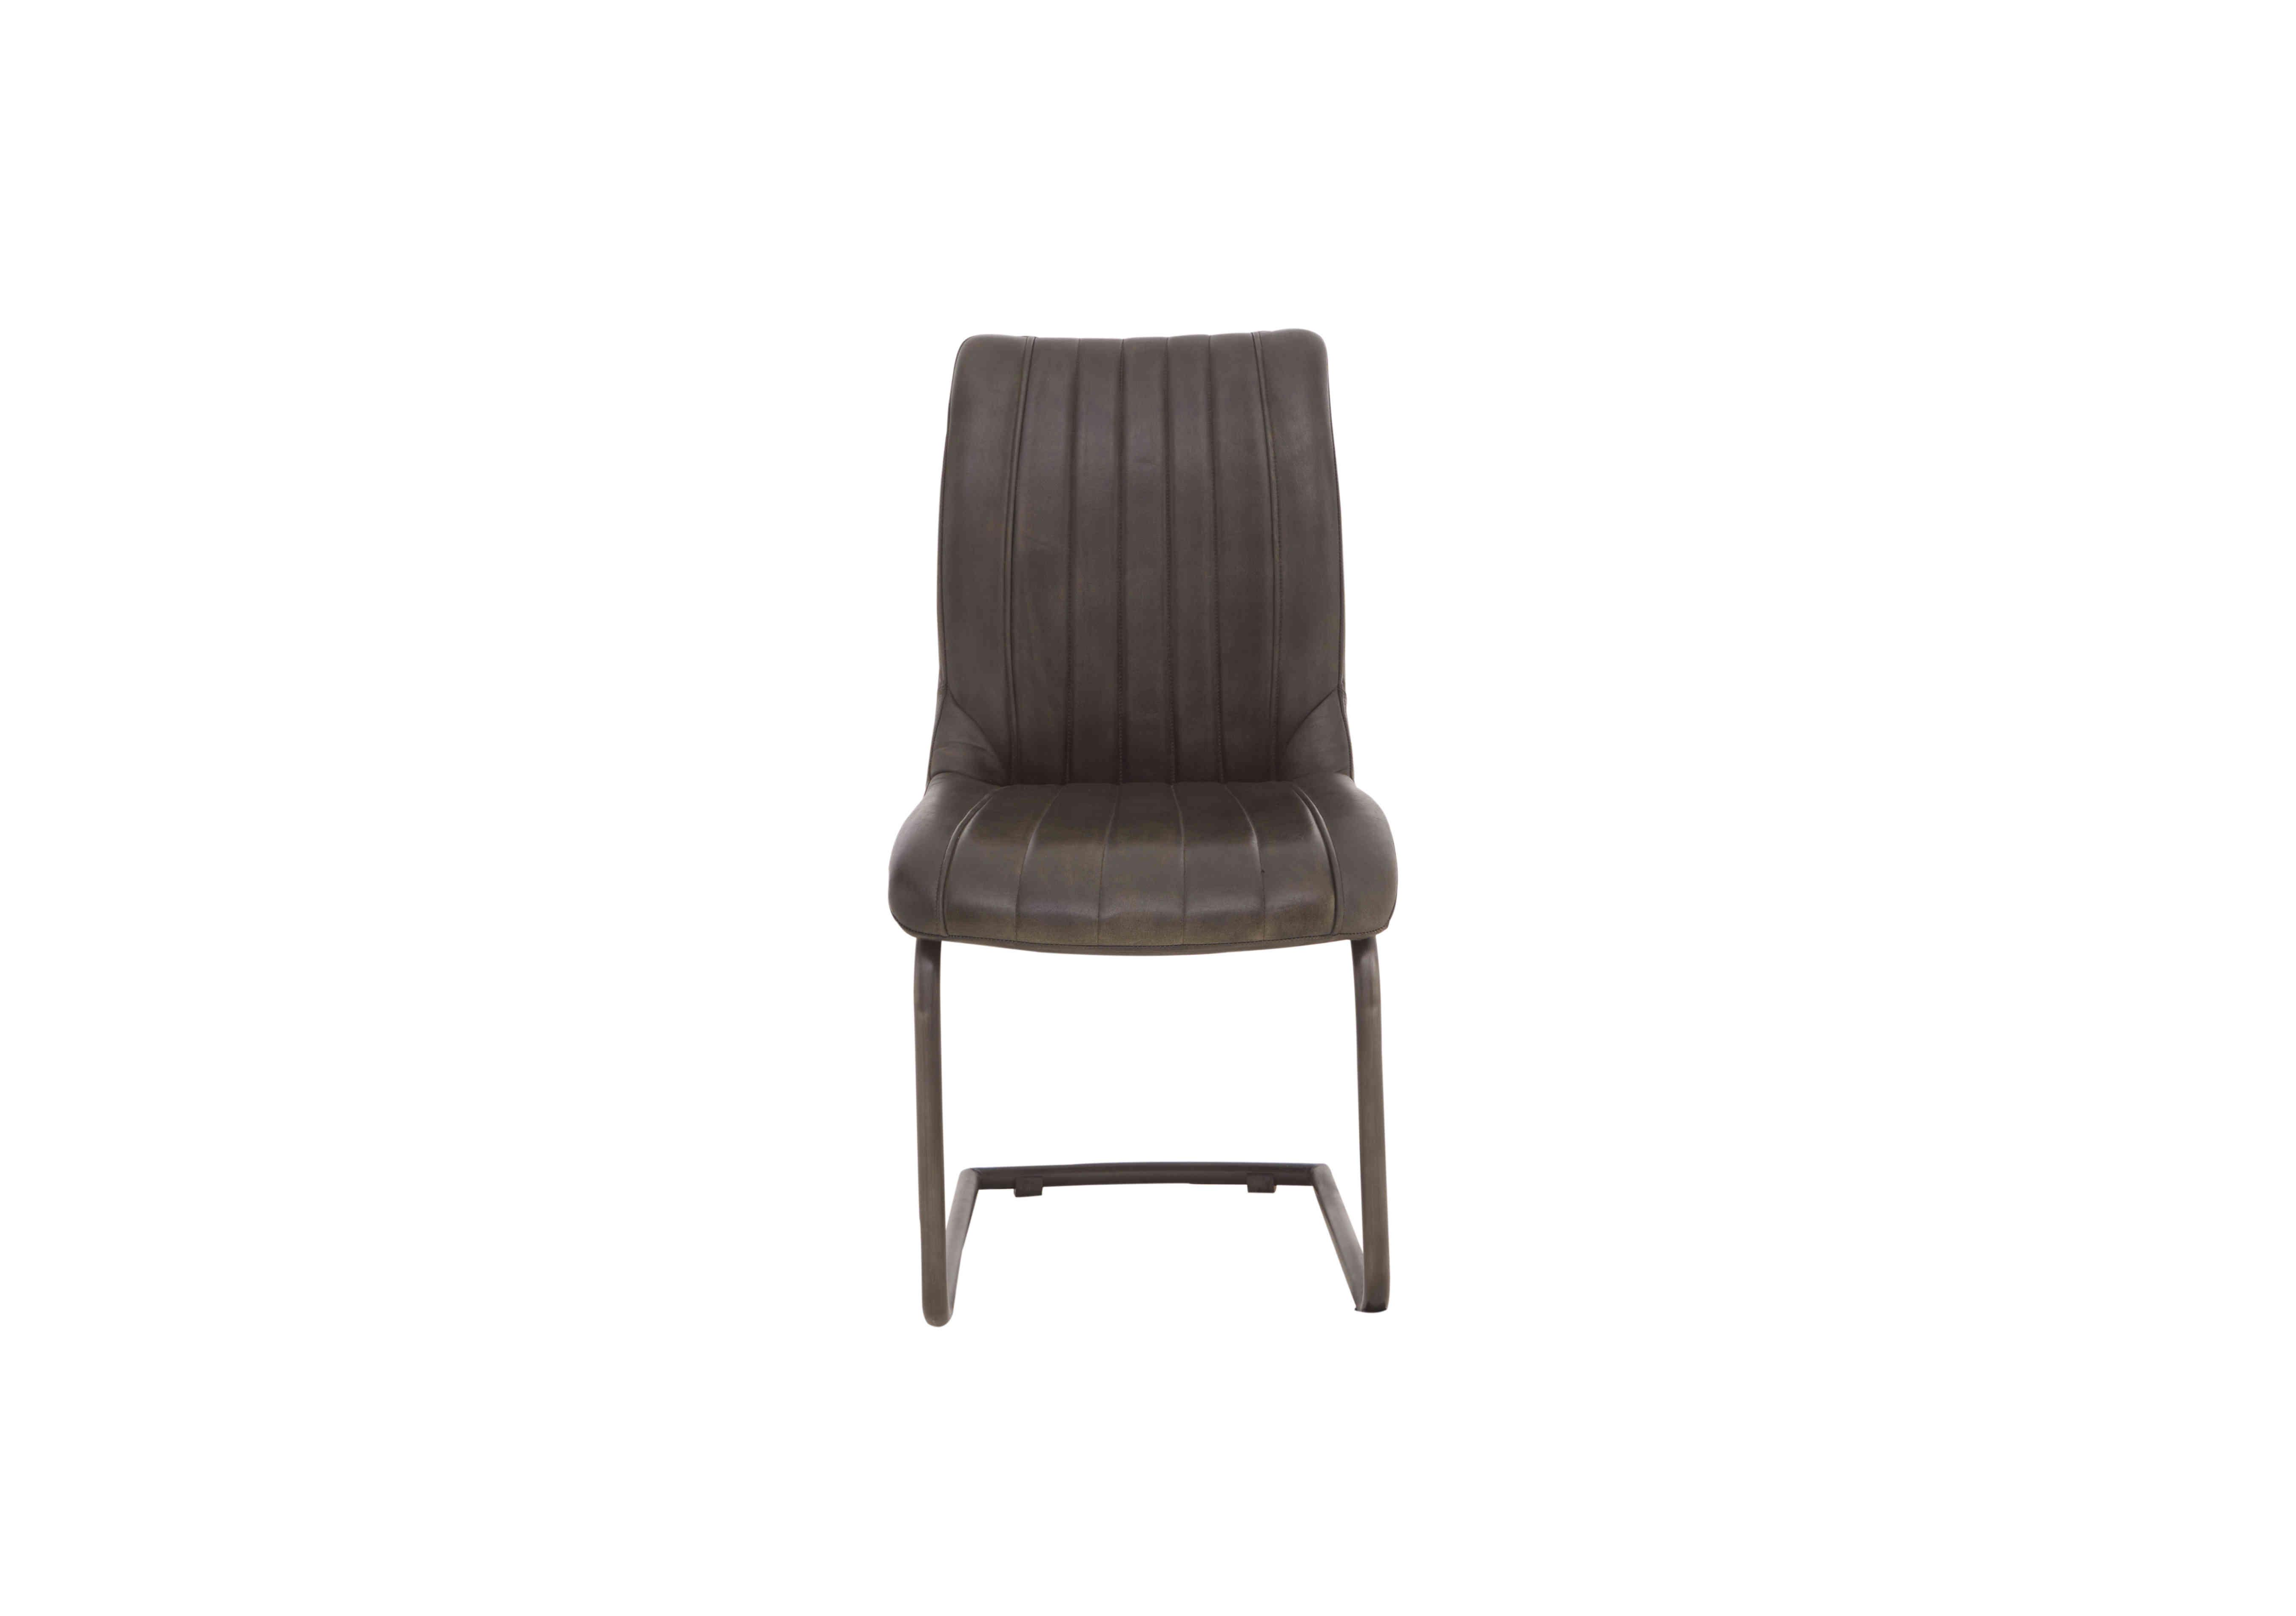 Dee Cantilever Leather Dining Chair in Vintage Dark Grey on Furniture Village